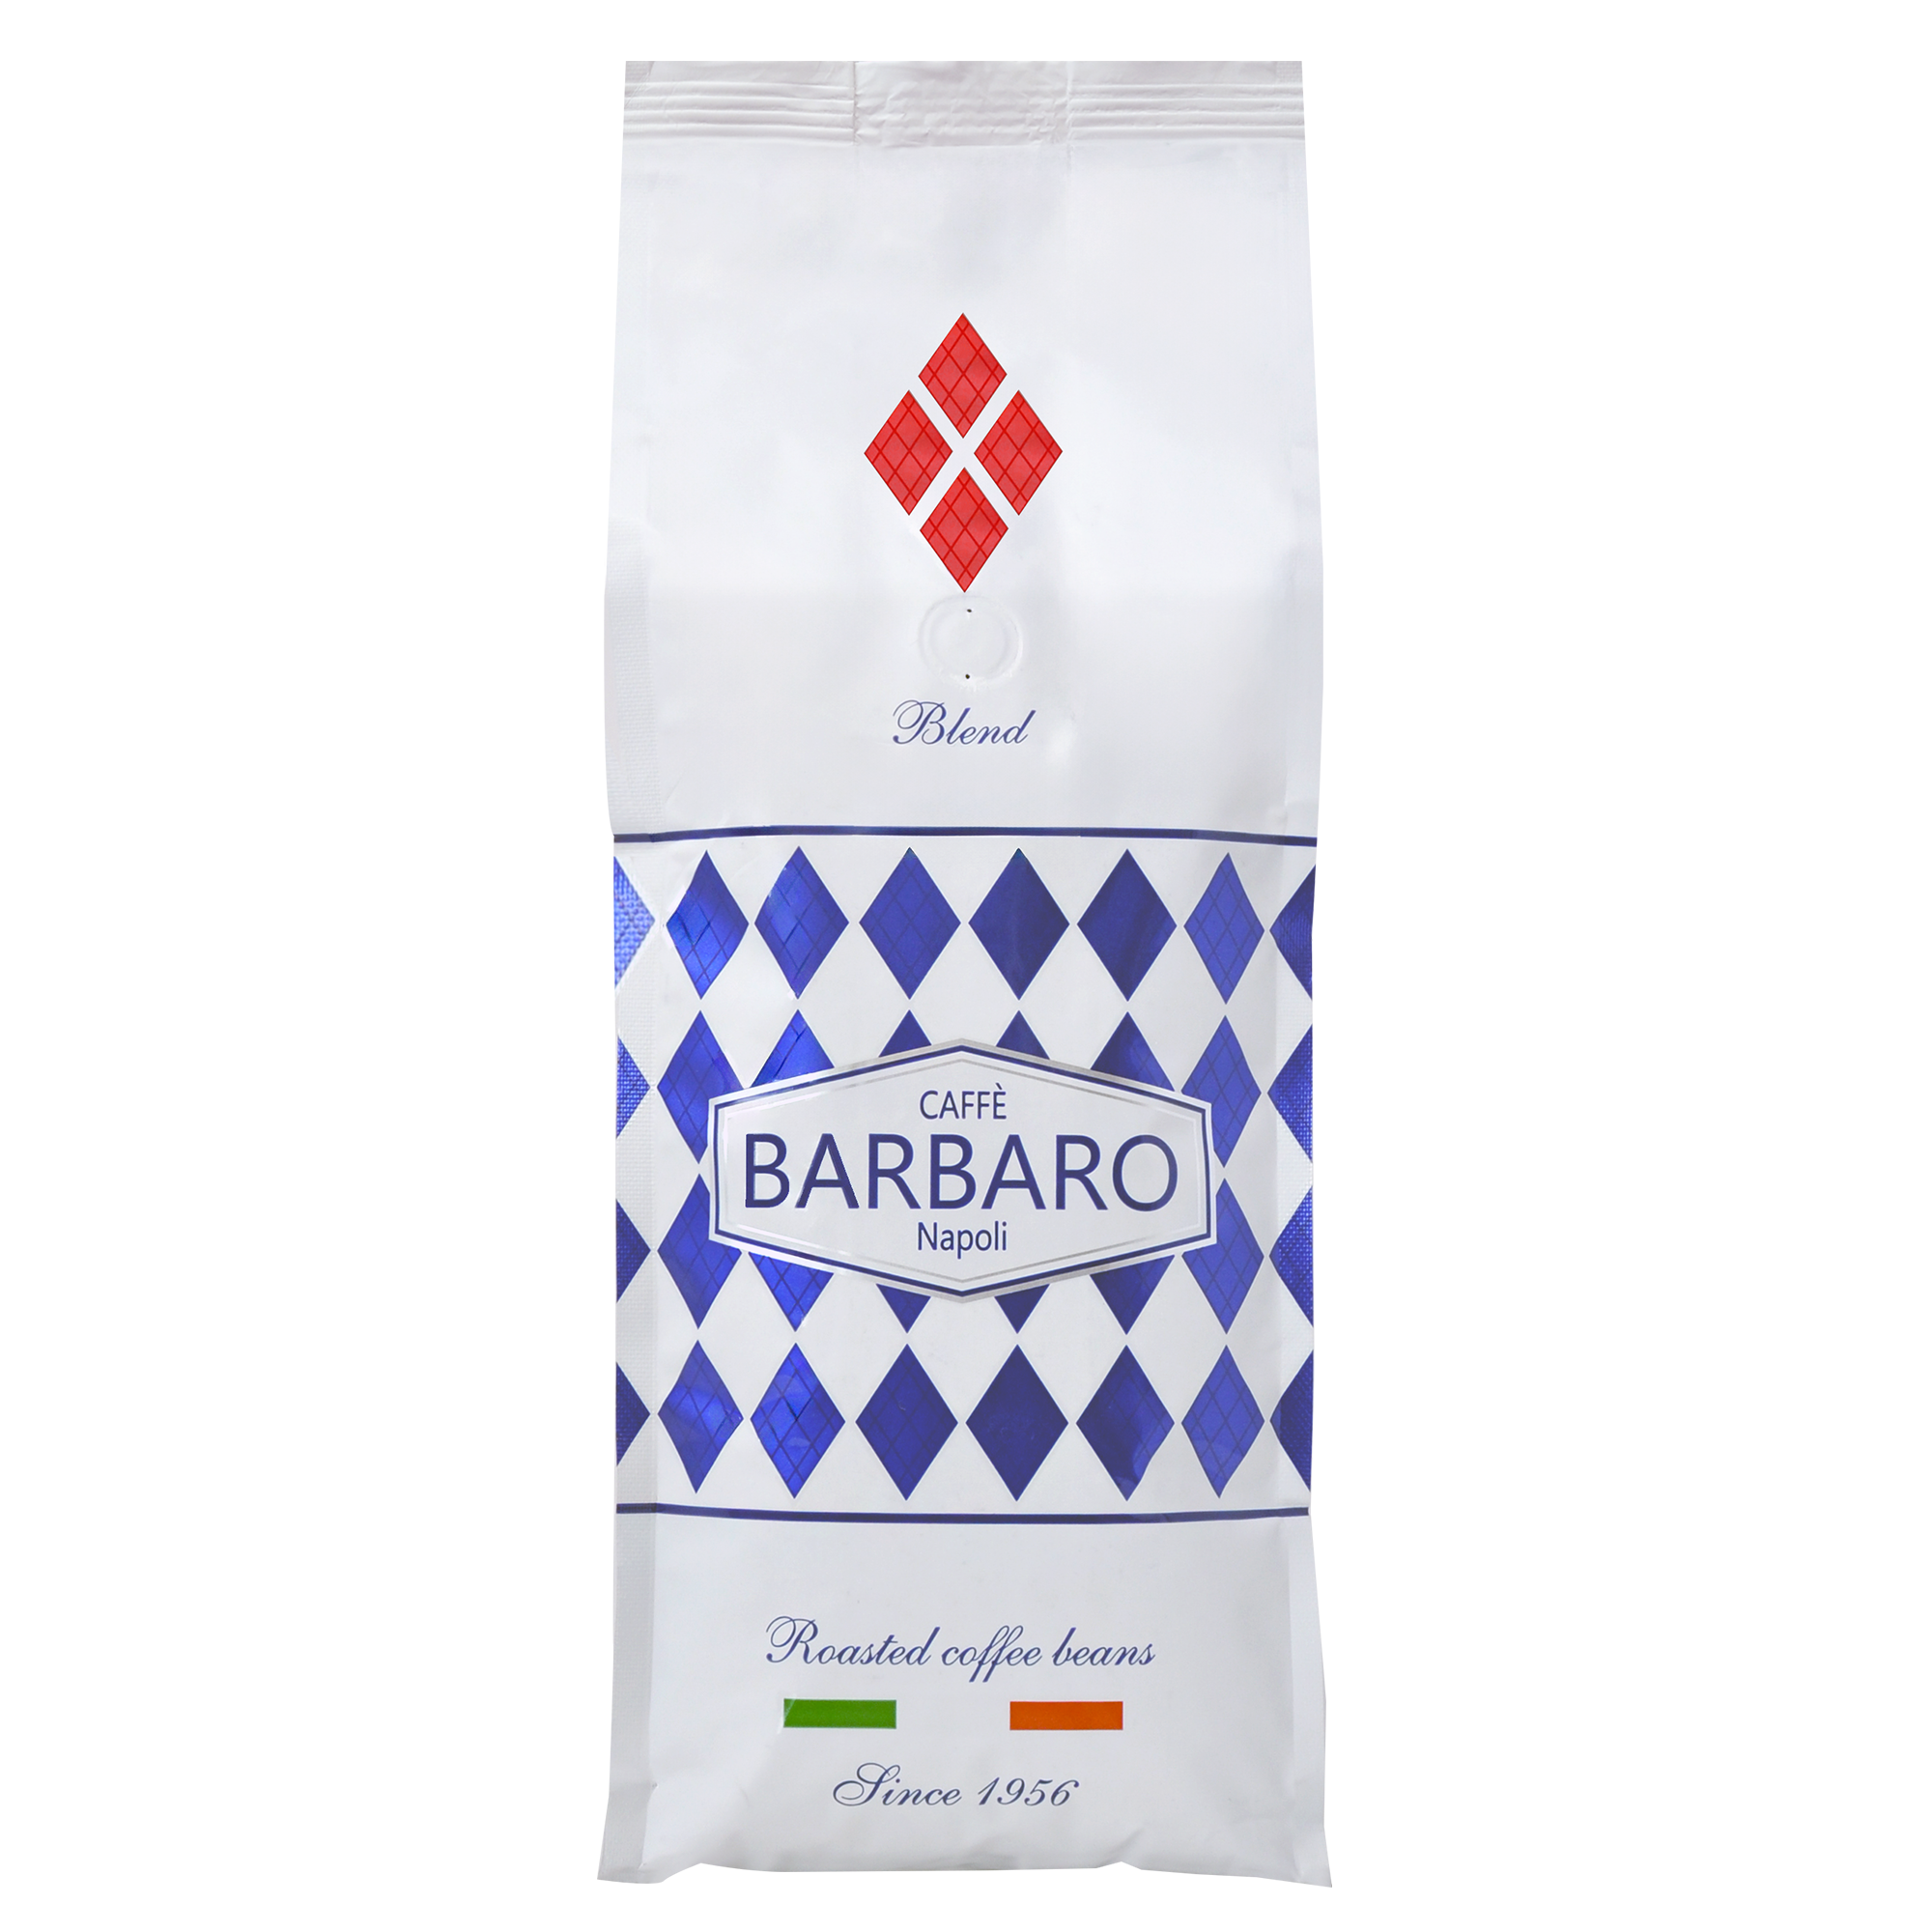 Barbaro Red Blend Roasted Espresso Coffee Beans - 2.2lbs/6pk